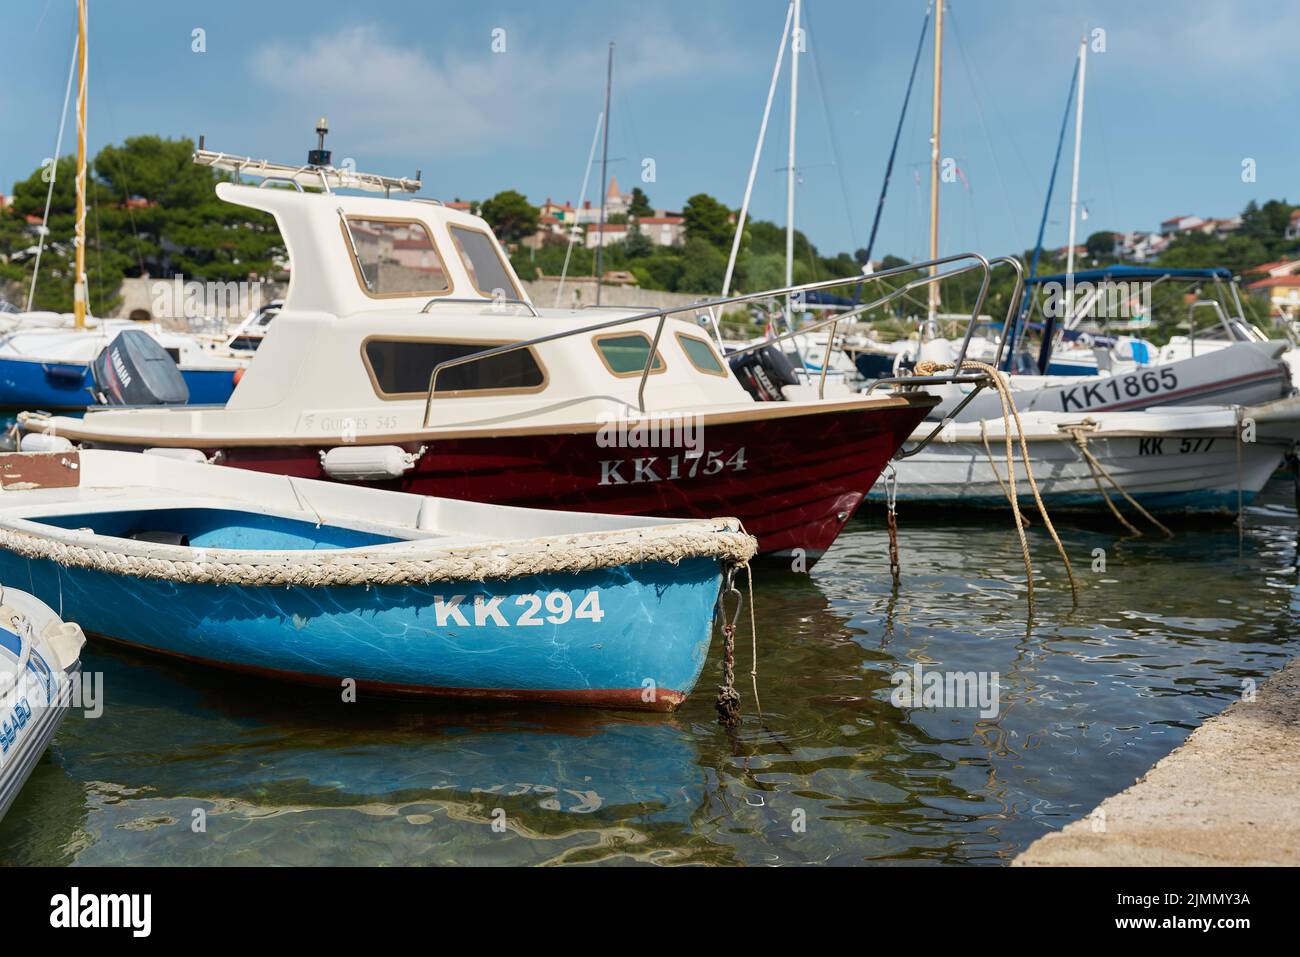 Boats in the port of the town of Krk on the Adriatic Sea in Croatia Stock Photo